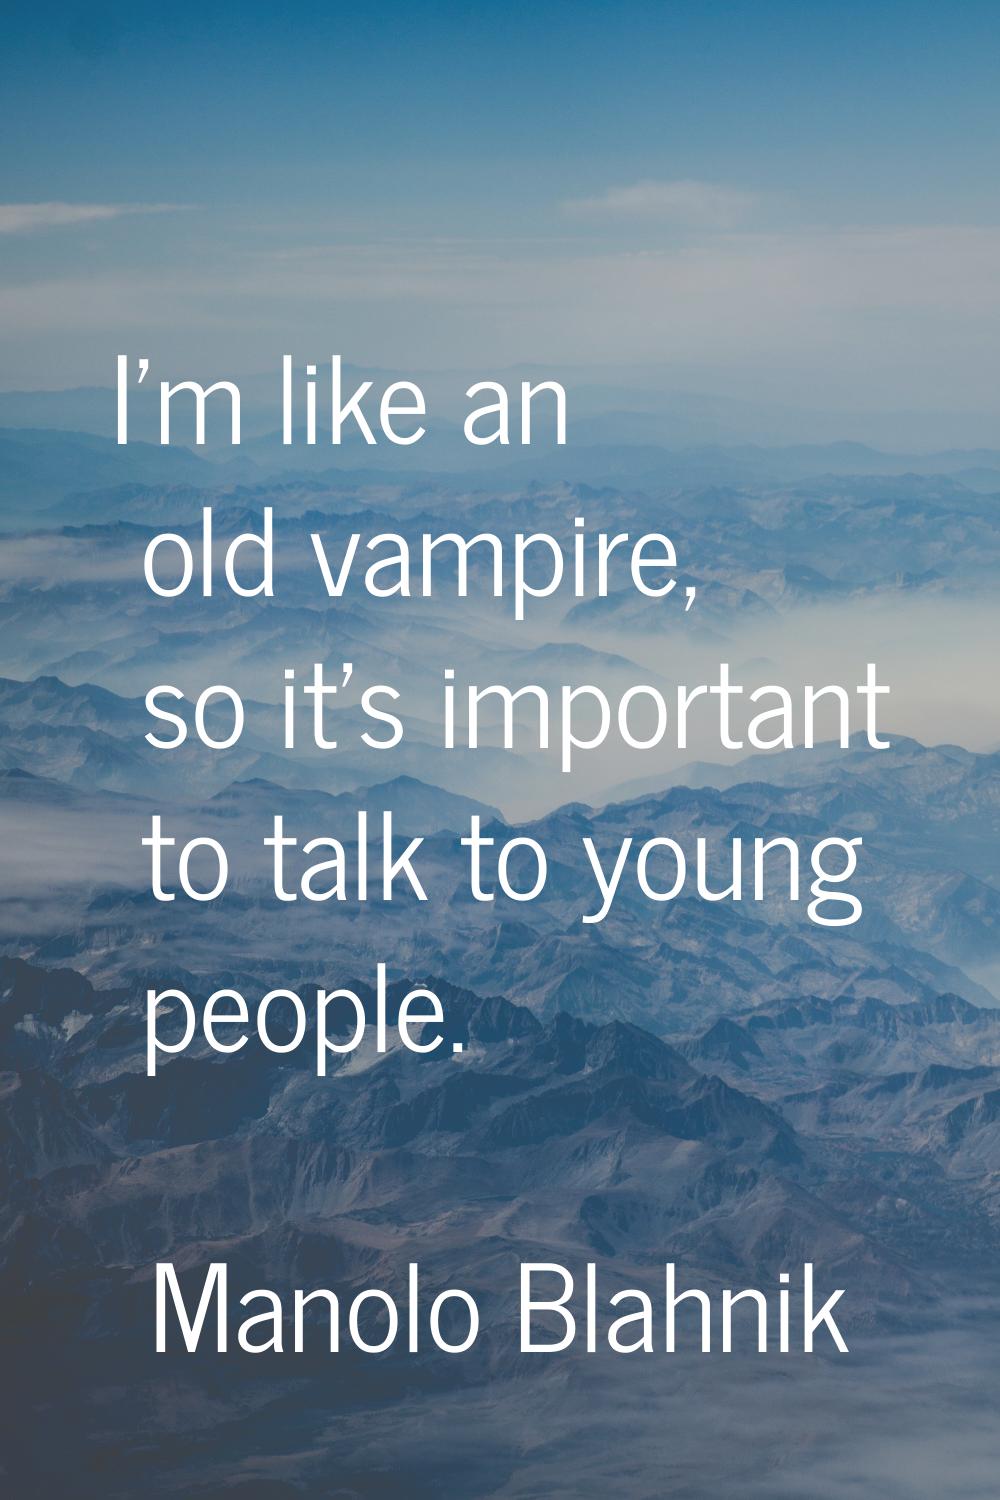 I'm like an old vampire, so it's important to talk to young people.